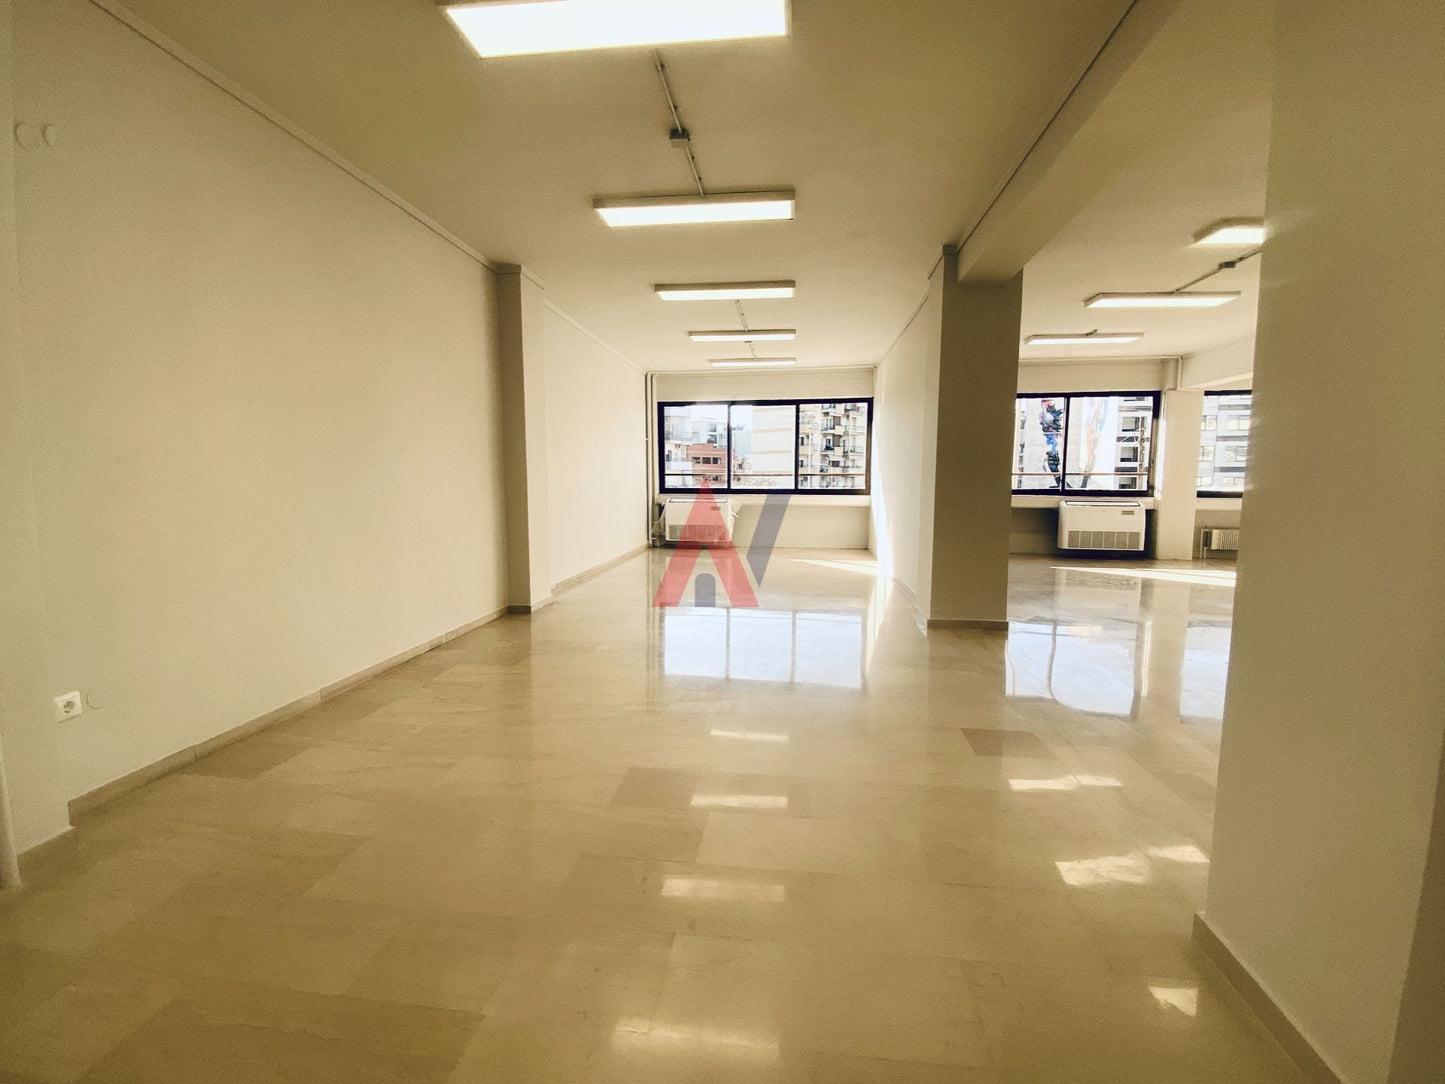 Office for rent 310sqm One Salonica Center Thessaloniki 